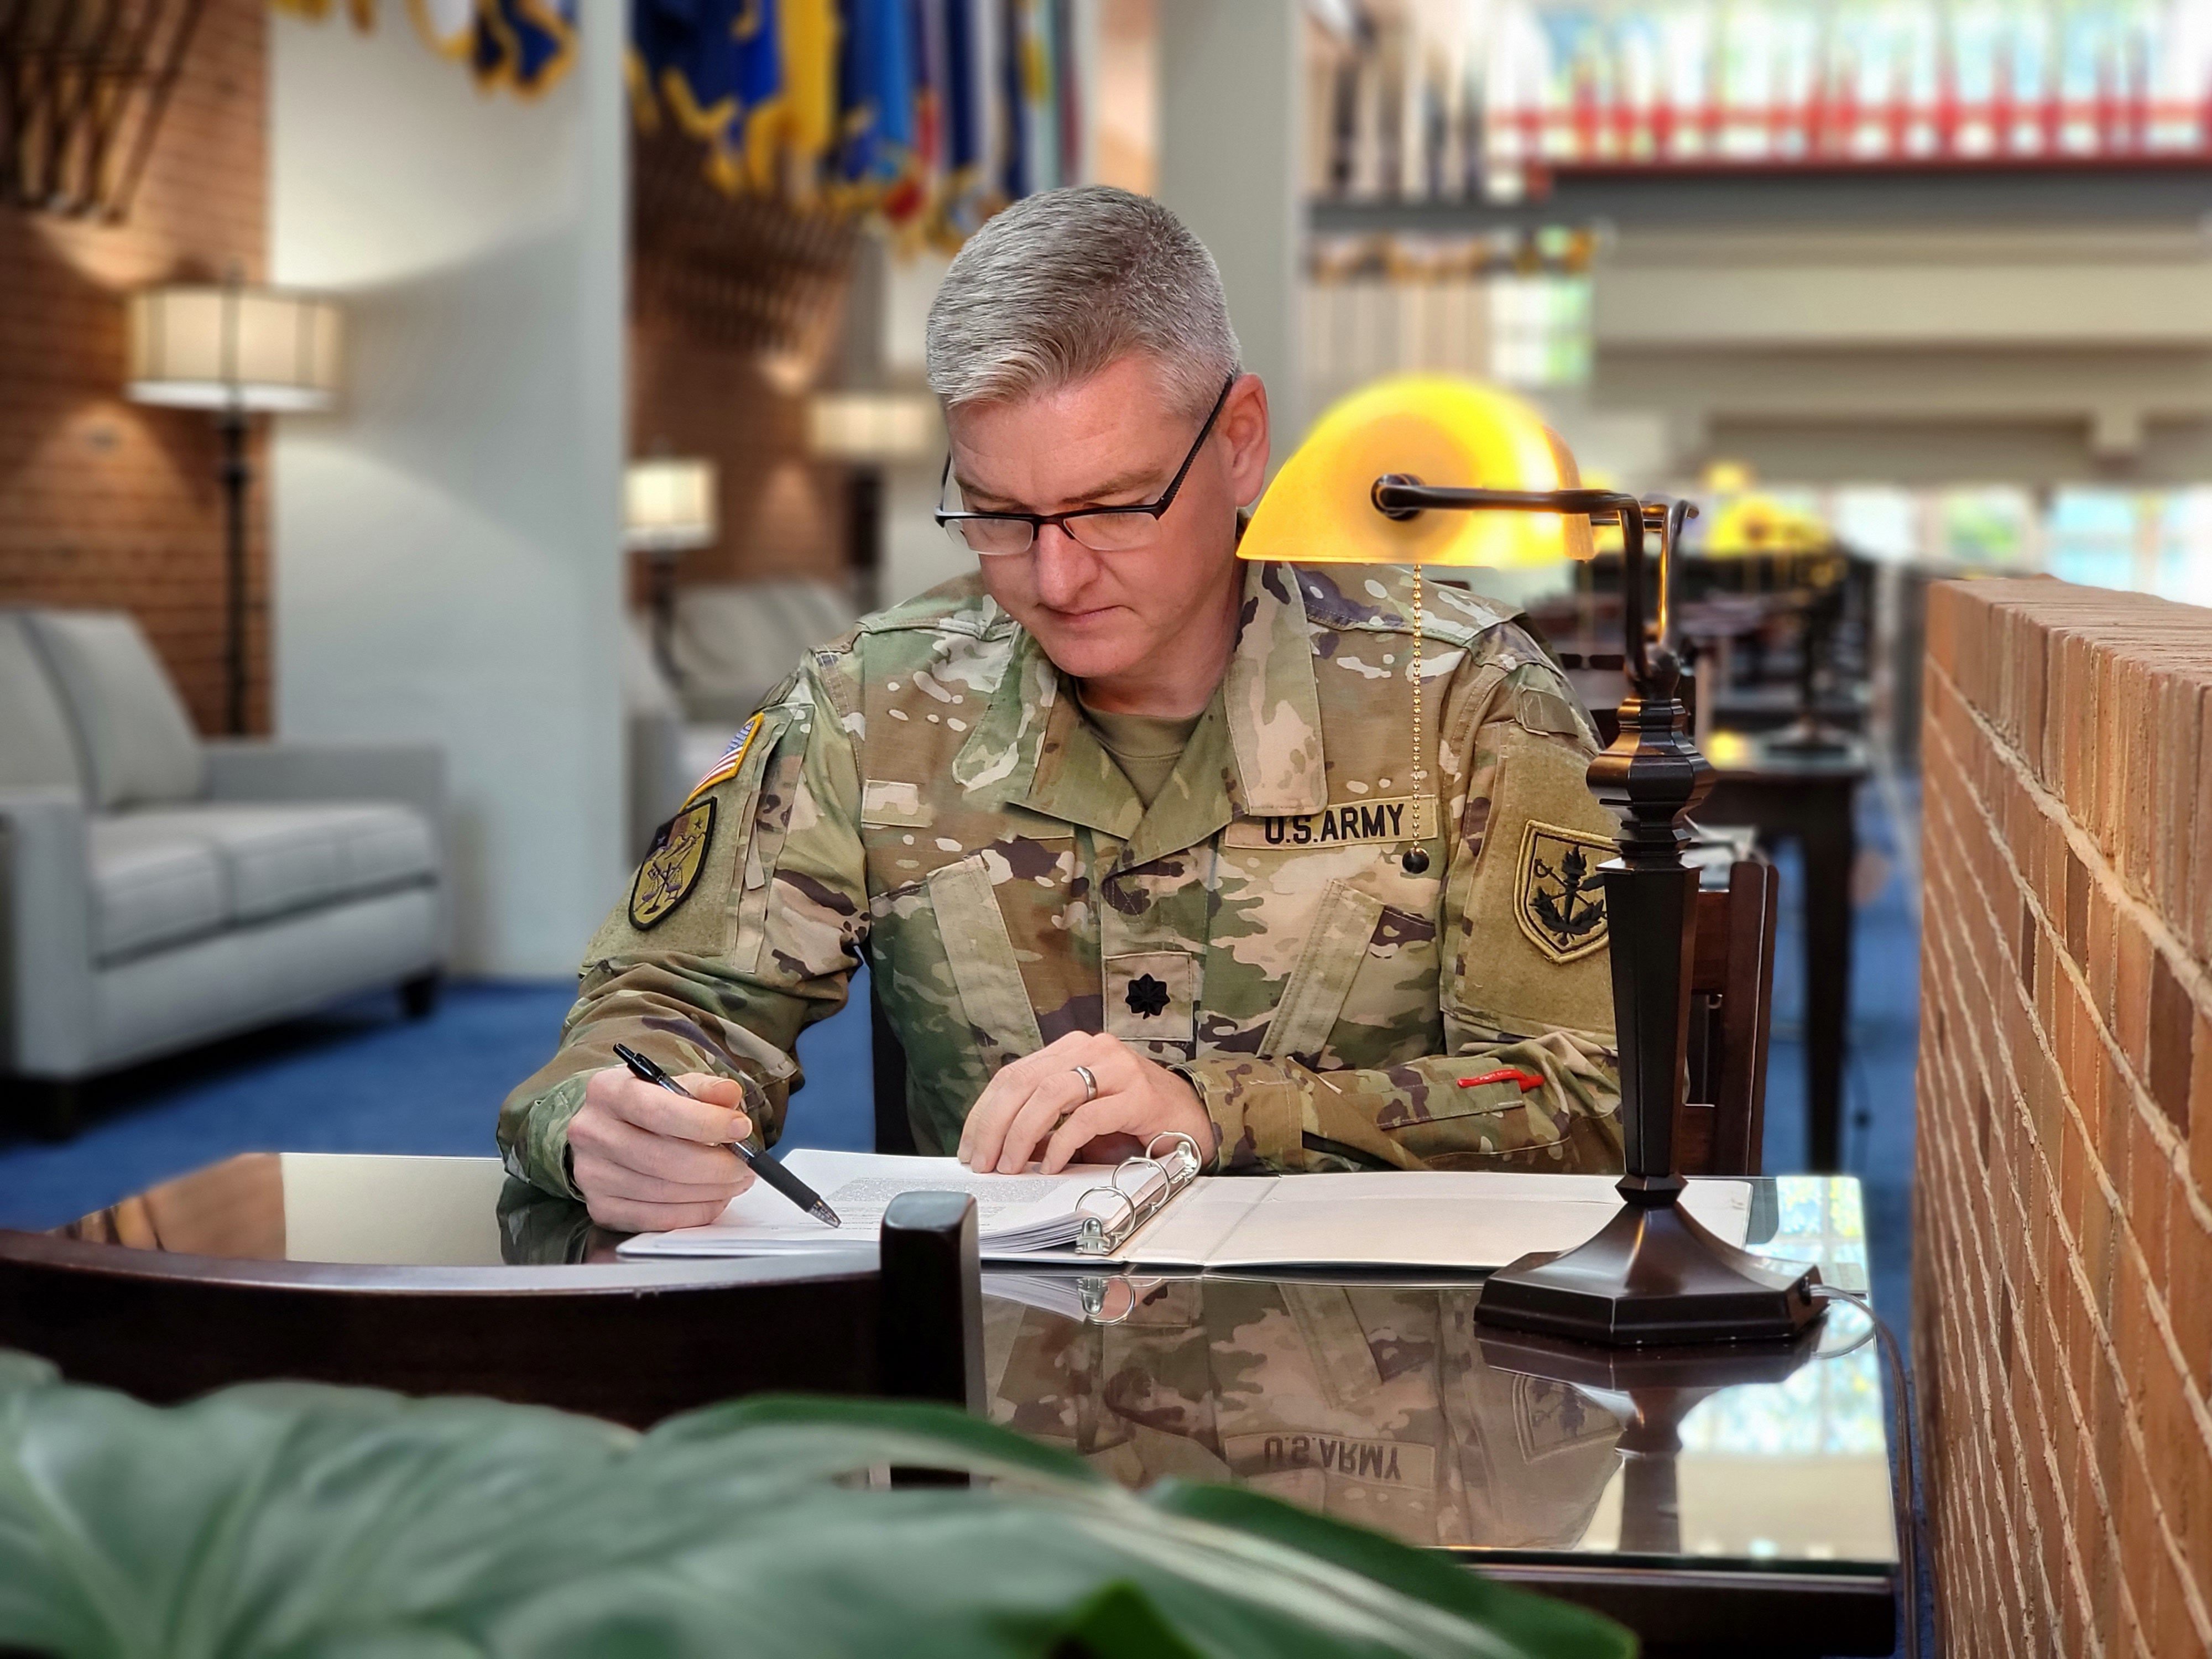 Soldier sitting at desk, pen in hand.